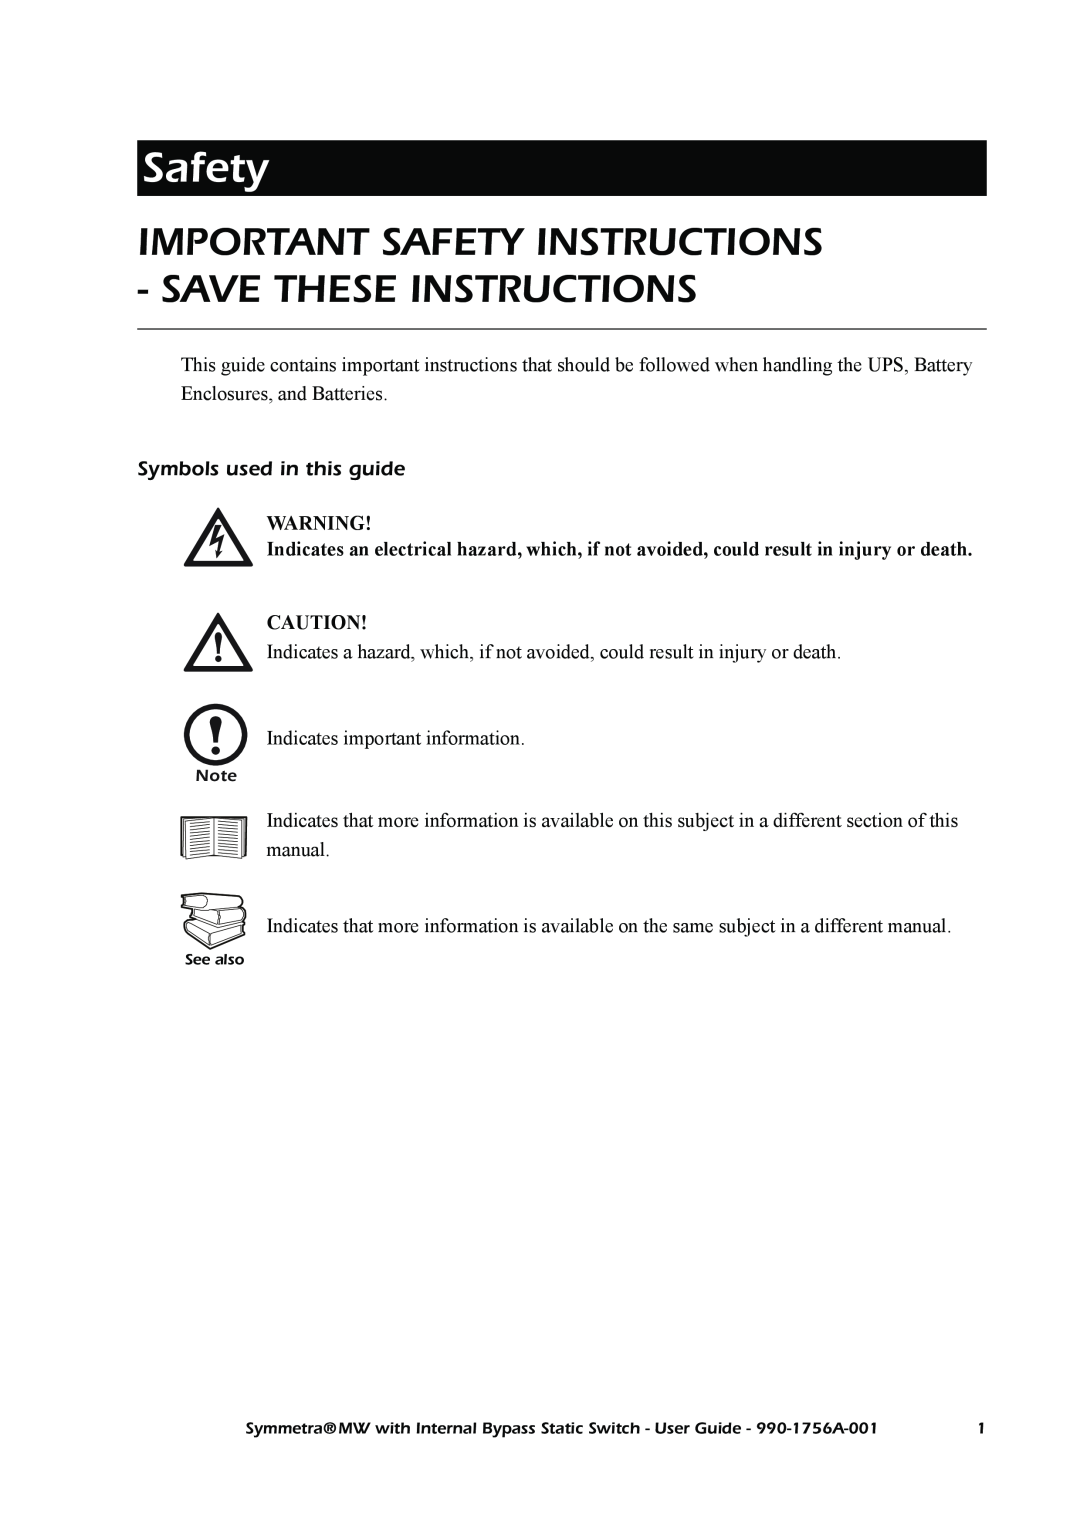 American Power Conversion Bypass Static manual Important Safety Instructions - Save These Instructions 